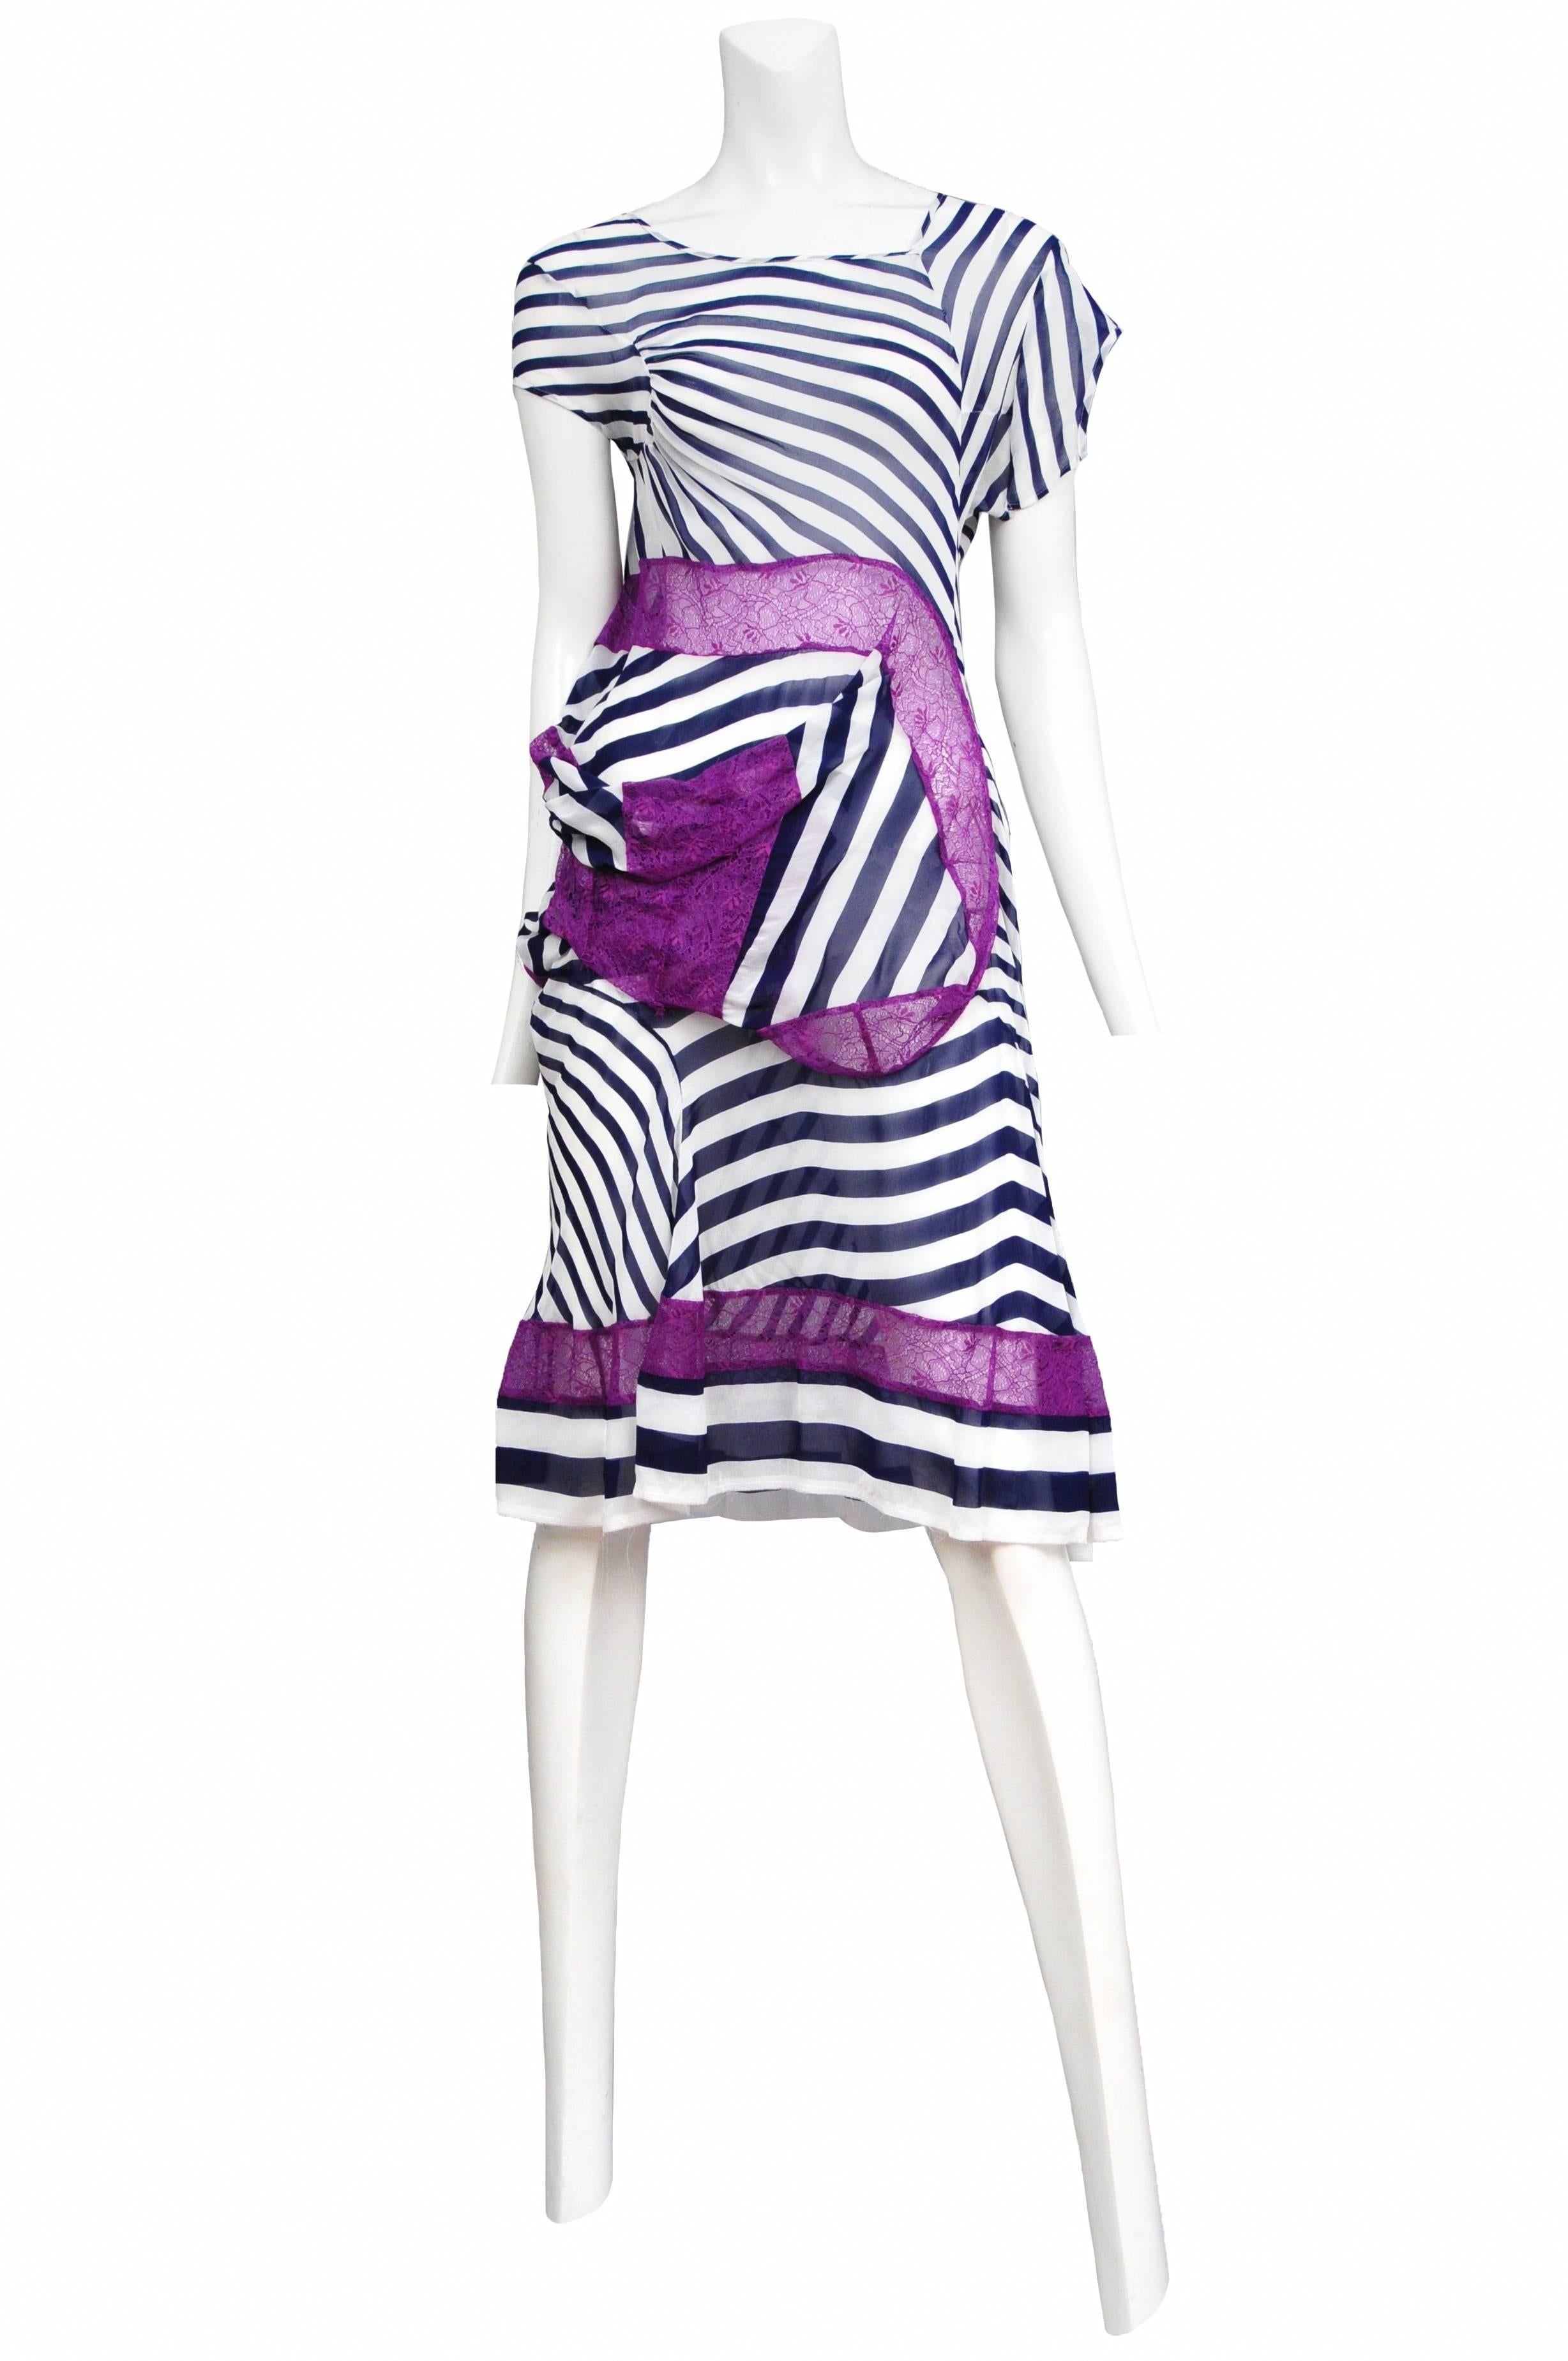 Vintage Junya Watanabe white and navy stripe knee length dress featuring abstract cap sleeves and purple lace draped throughout bodice and lining the hem.  Runway piece from the Spring / Summer 2011 Collection.
Please inquire for additional images.